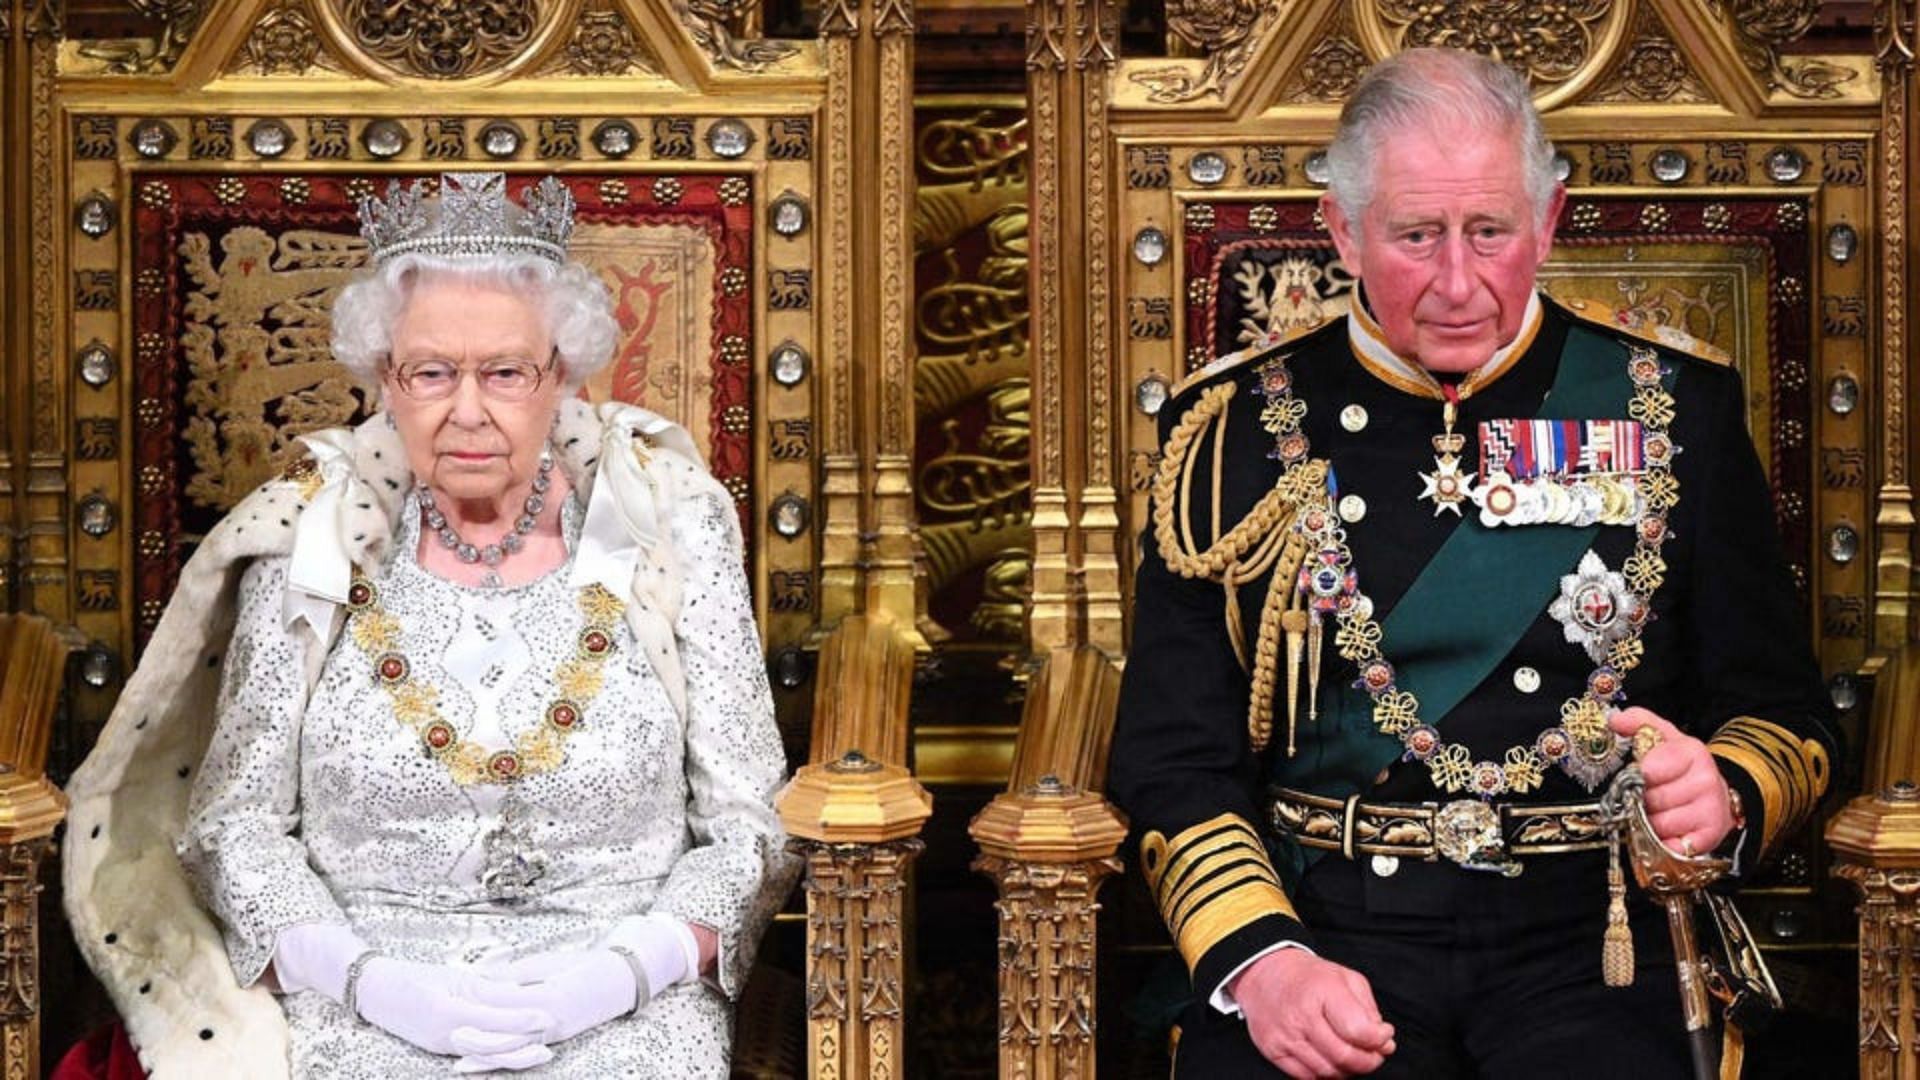 Queen Elizabeth II and Charles (Image via Forbes)